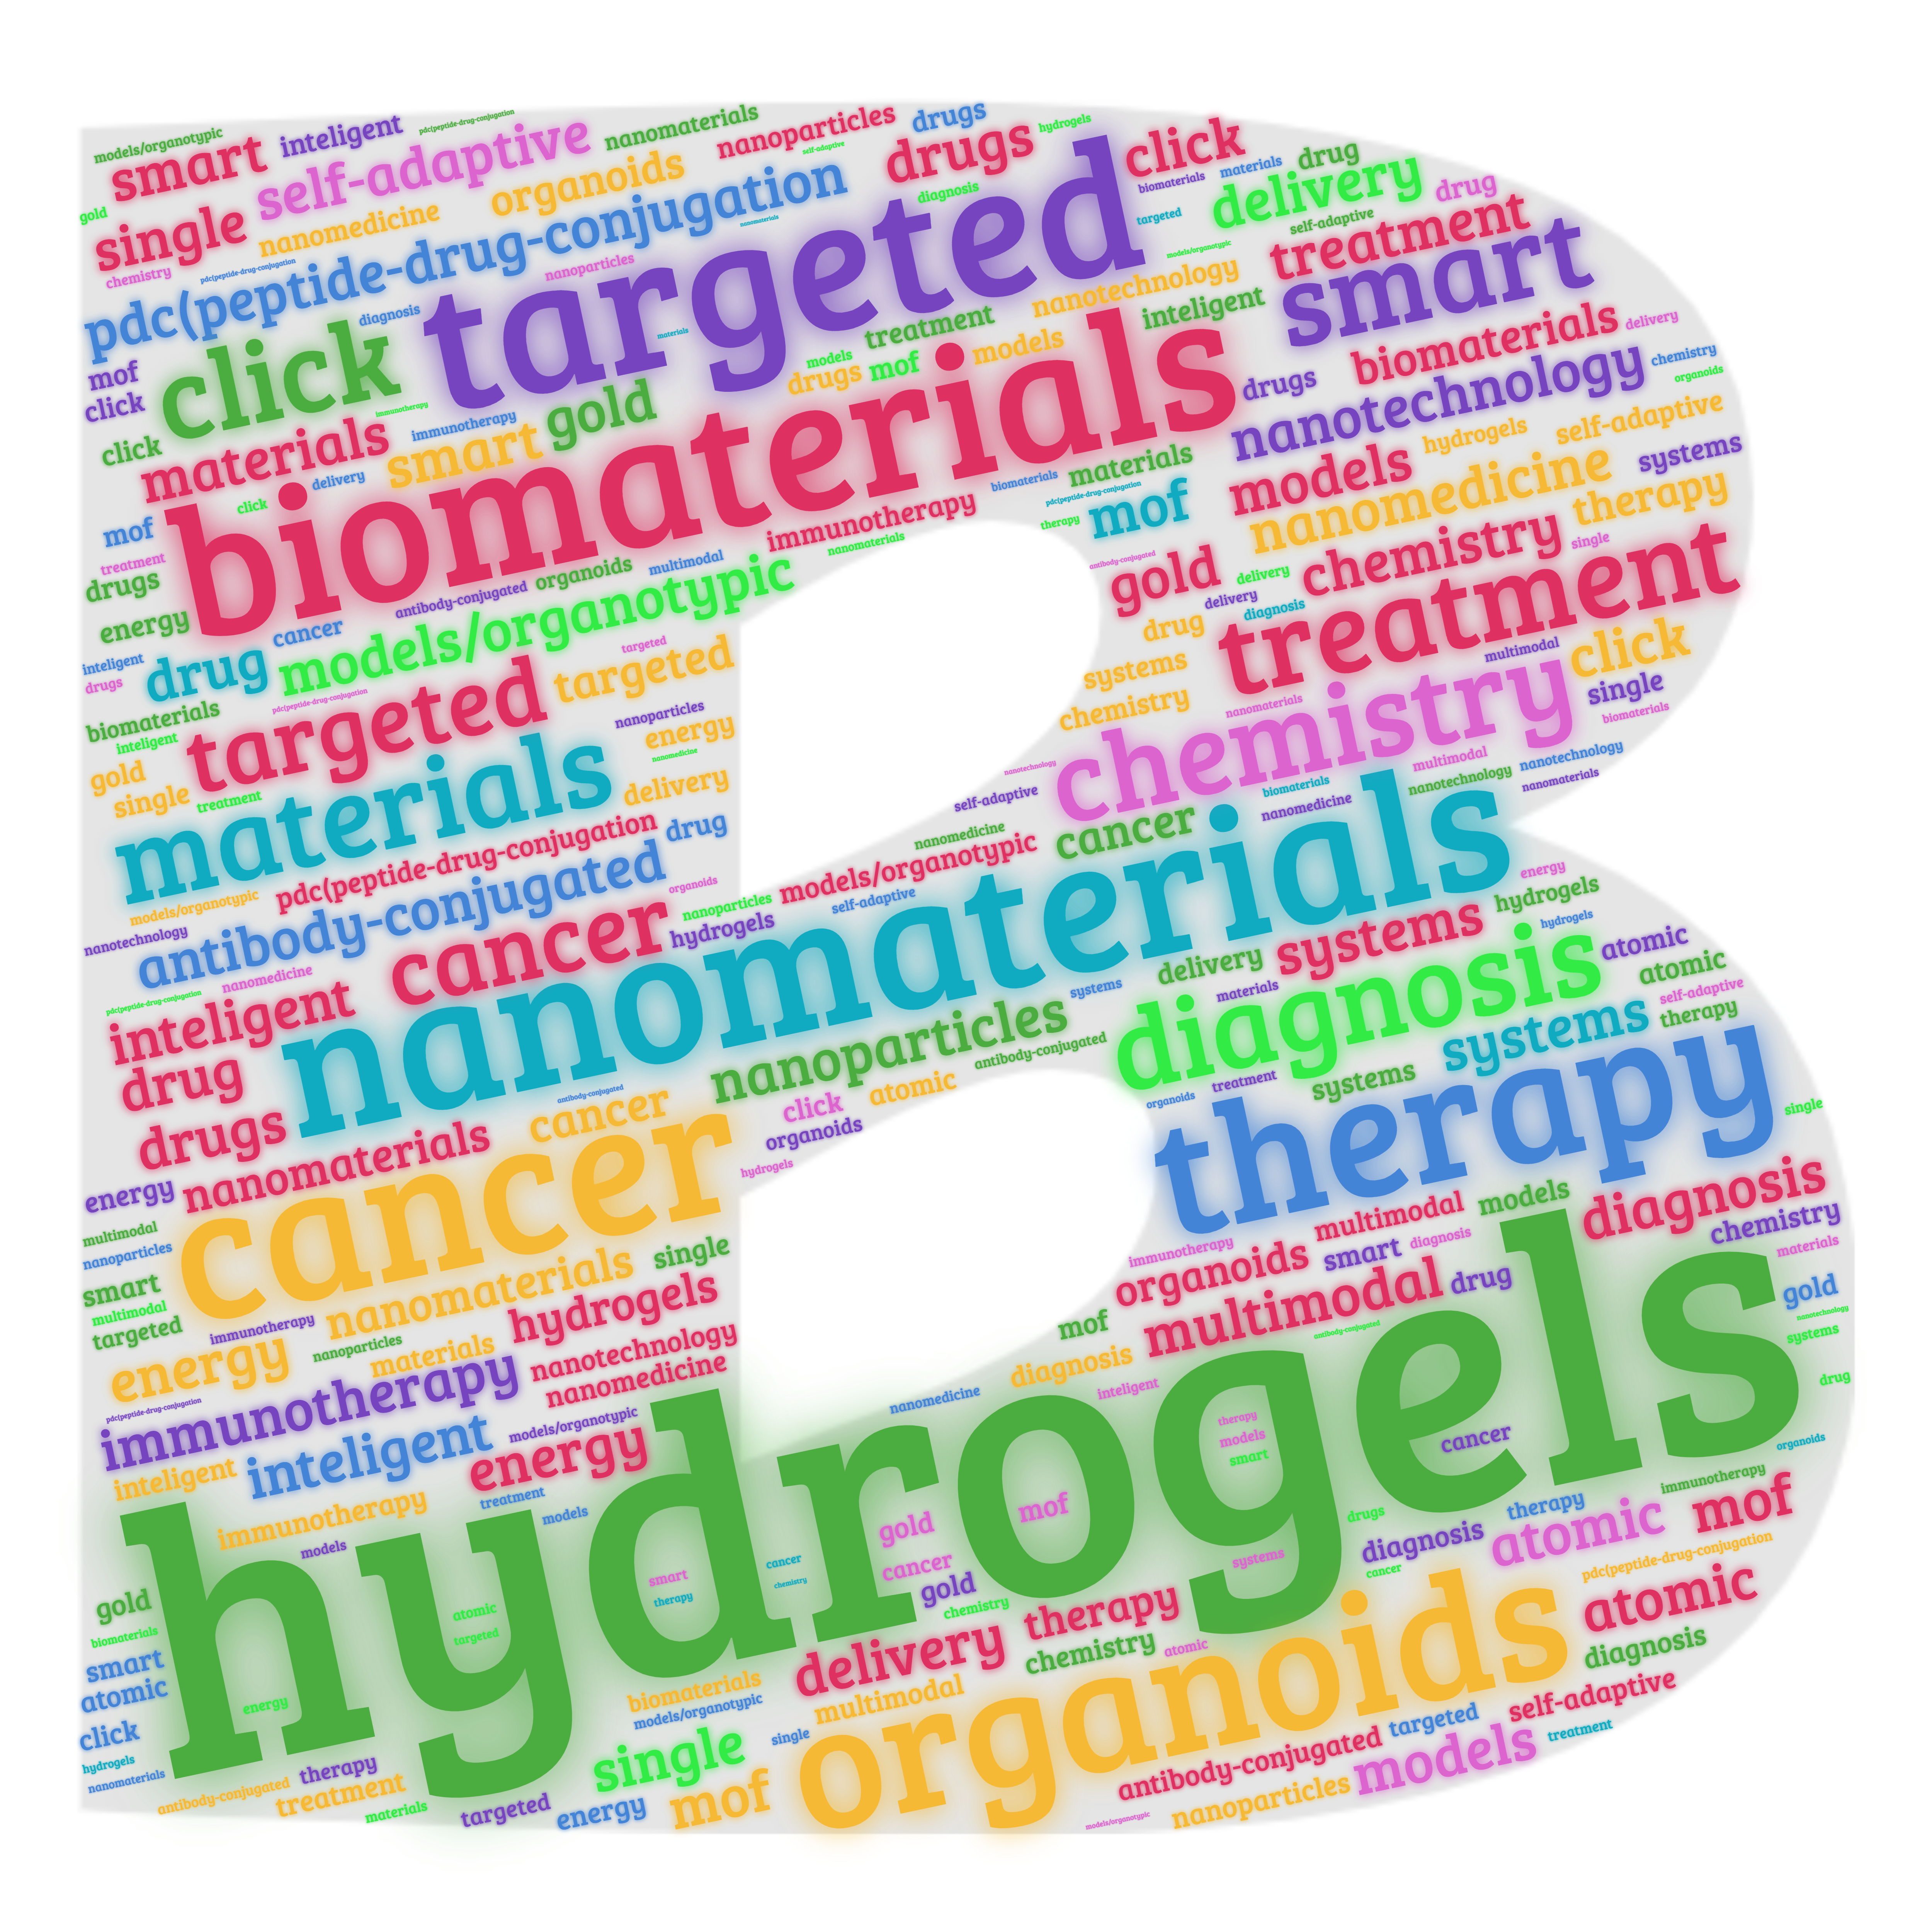 The letter 'B' filled with multicoloured words from survey responces. Hydrogels, Cancer, Targeted, Biomaterials, Nanomaterials, Therapy, Organoids.